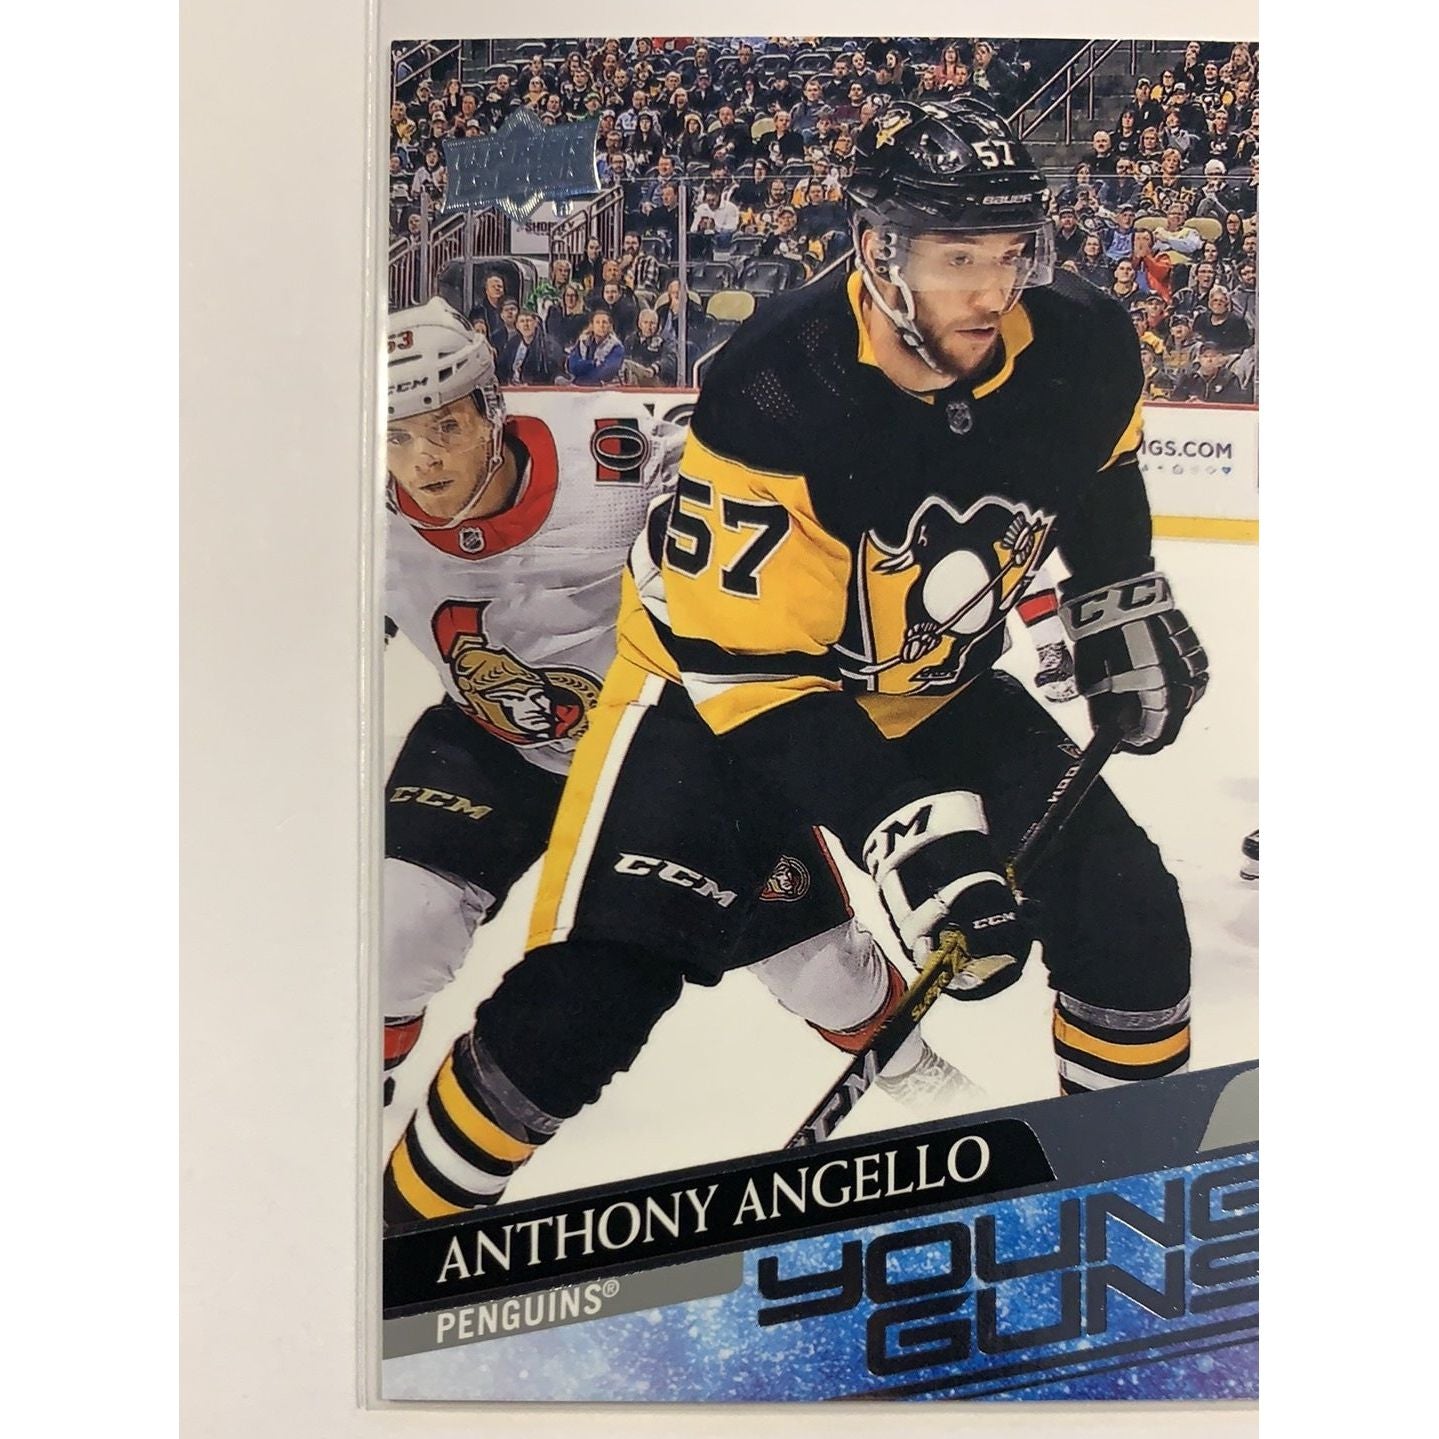  2020-21 Upper Deck Series 2 Anthony Angelo Young Guns  Local Legends Cards & Collectibles